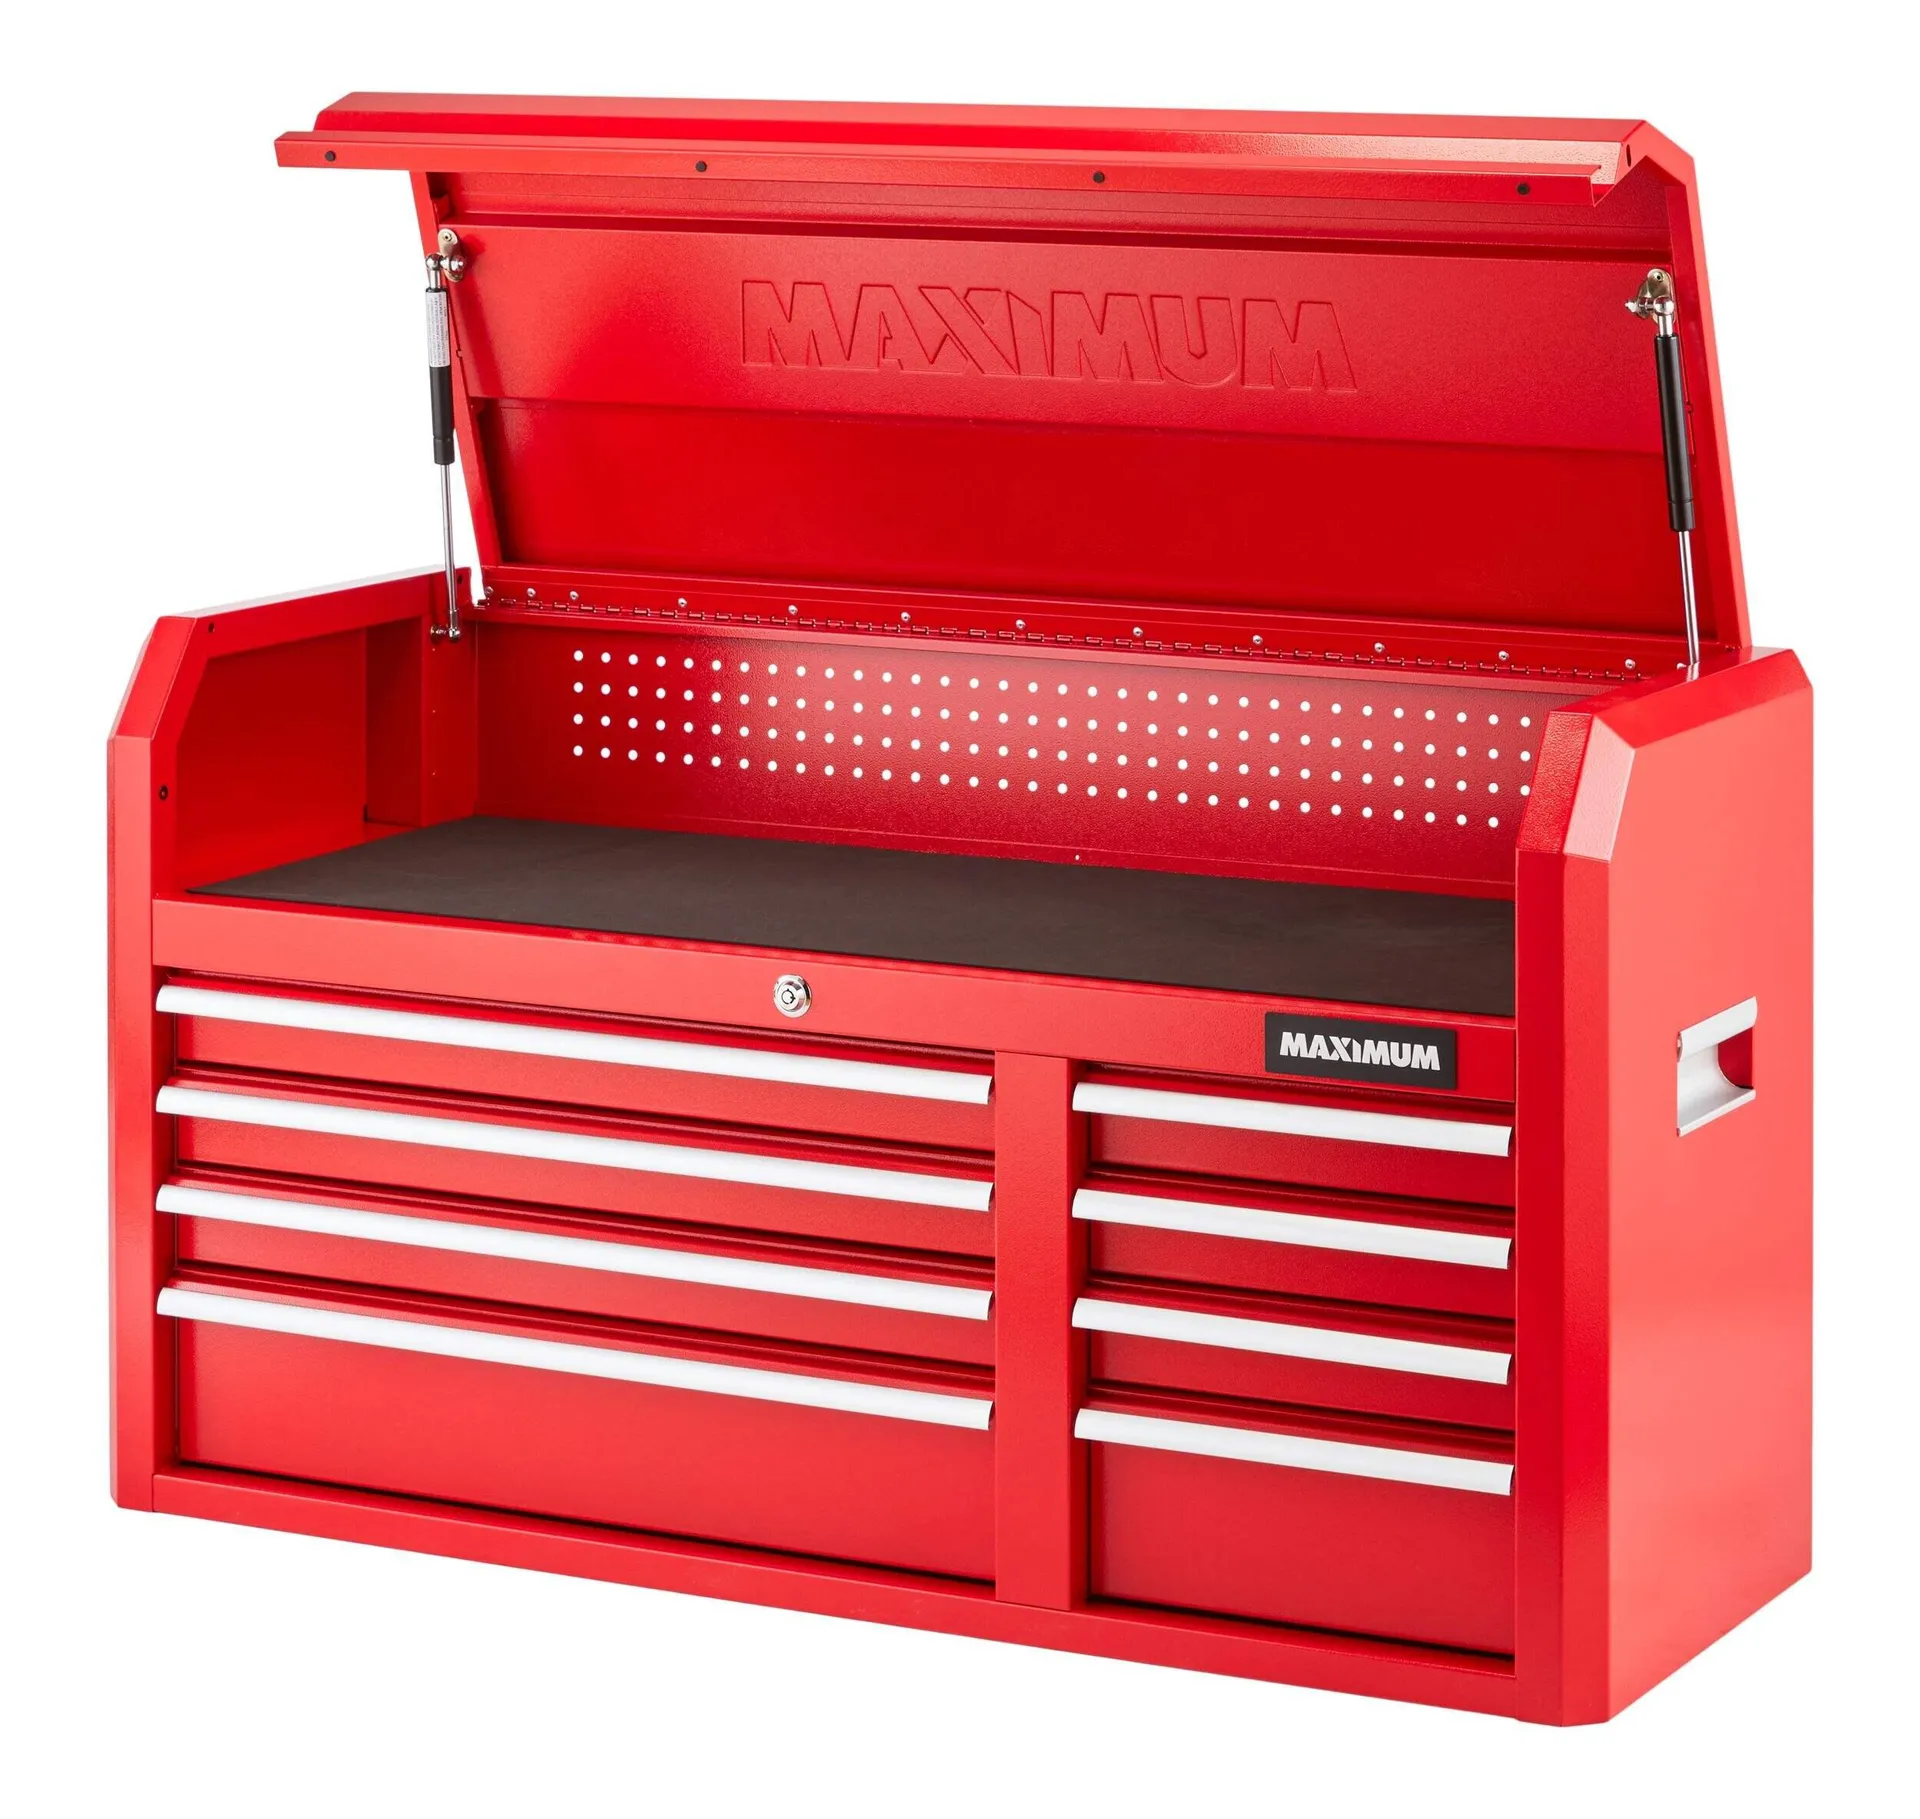 MAXIMUM Tool Storage Chest, 8-Drawer, Built-In Power Bar with USB, 47-in, Red